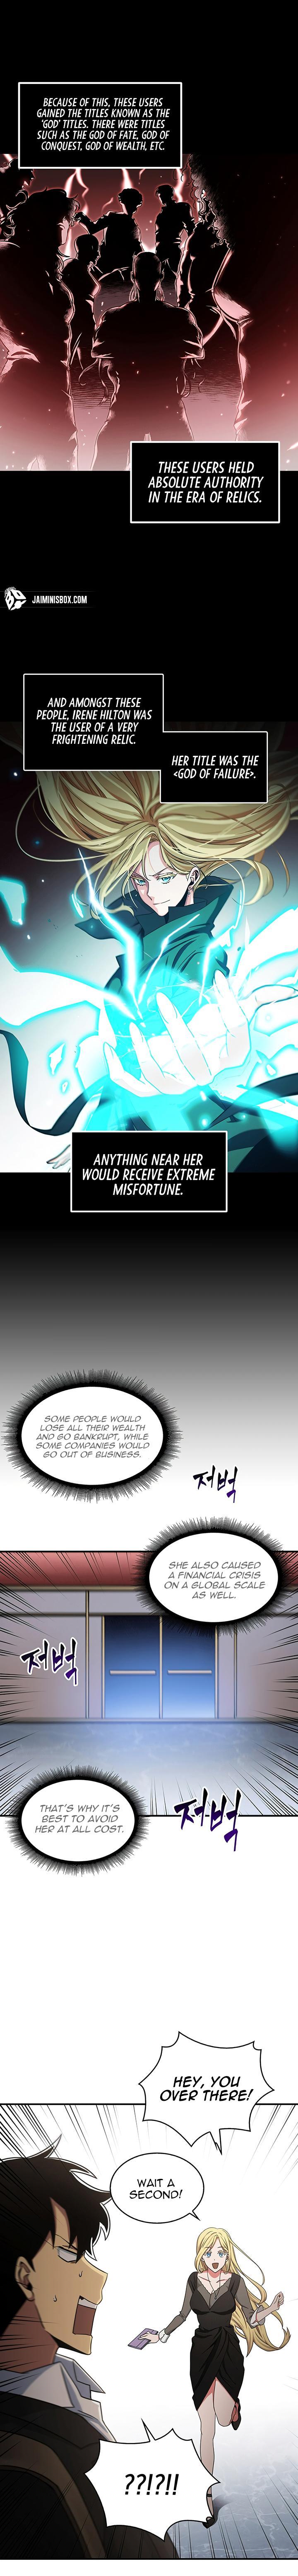 Tomb Raider King - Chapter 15 Page 21